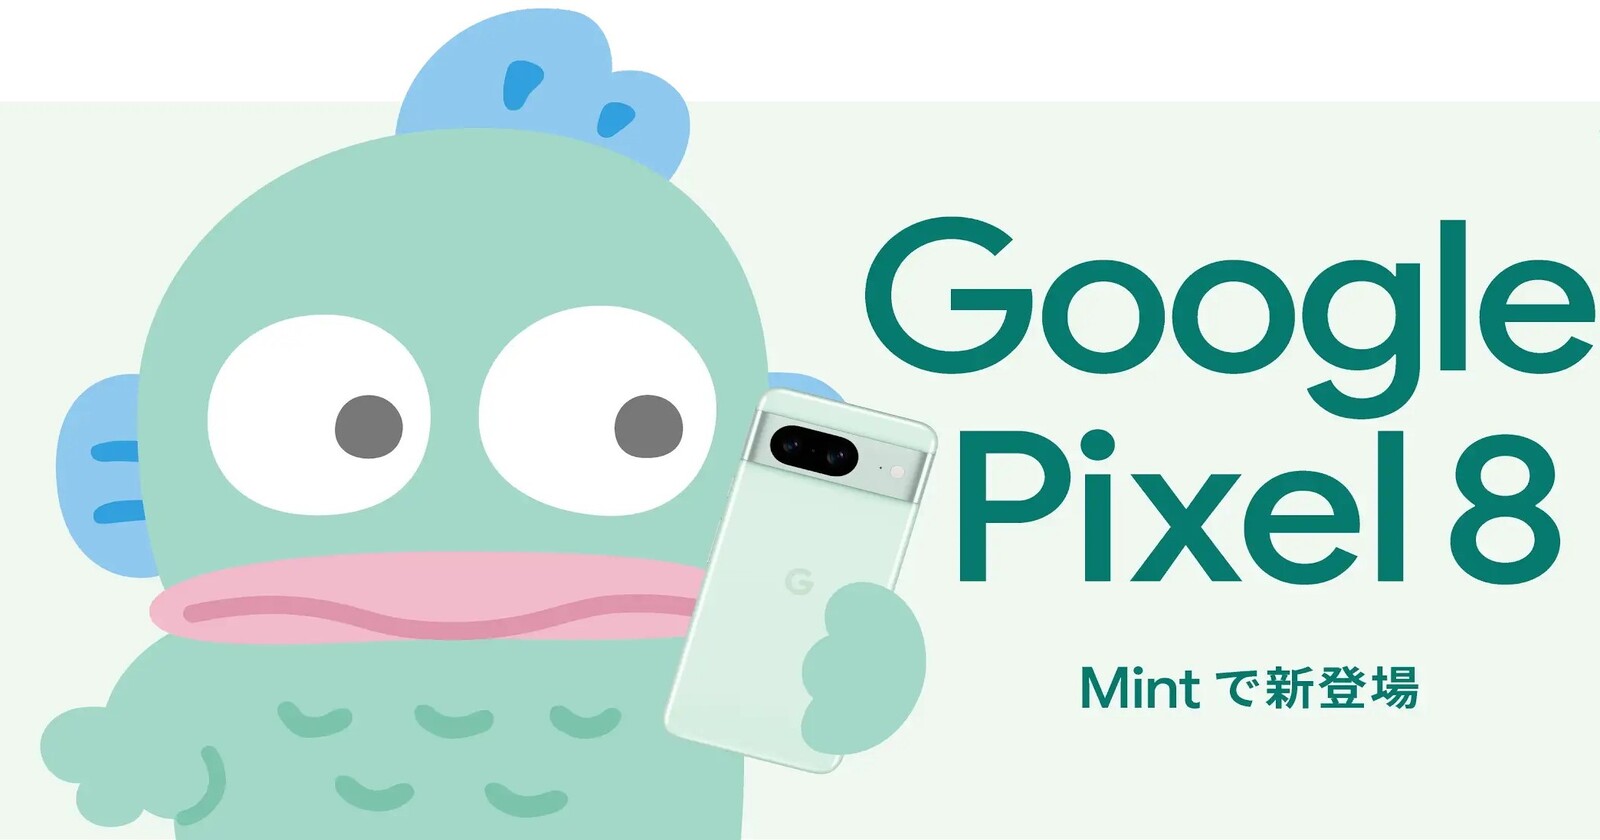 Google Store Japan collaborates with Hangyodon to promote new 'Mint' colored Pixel 8